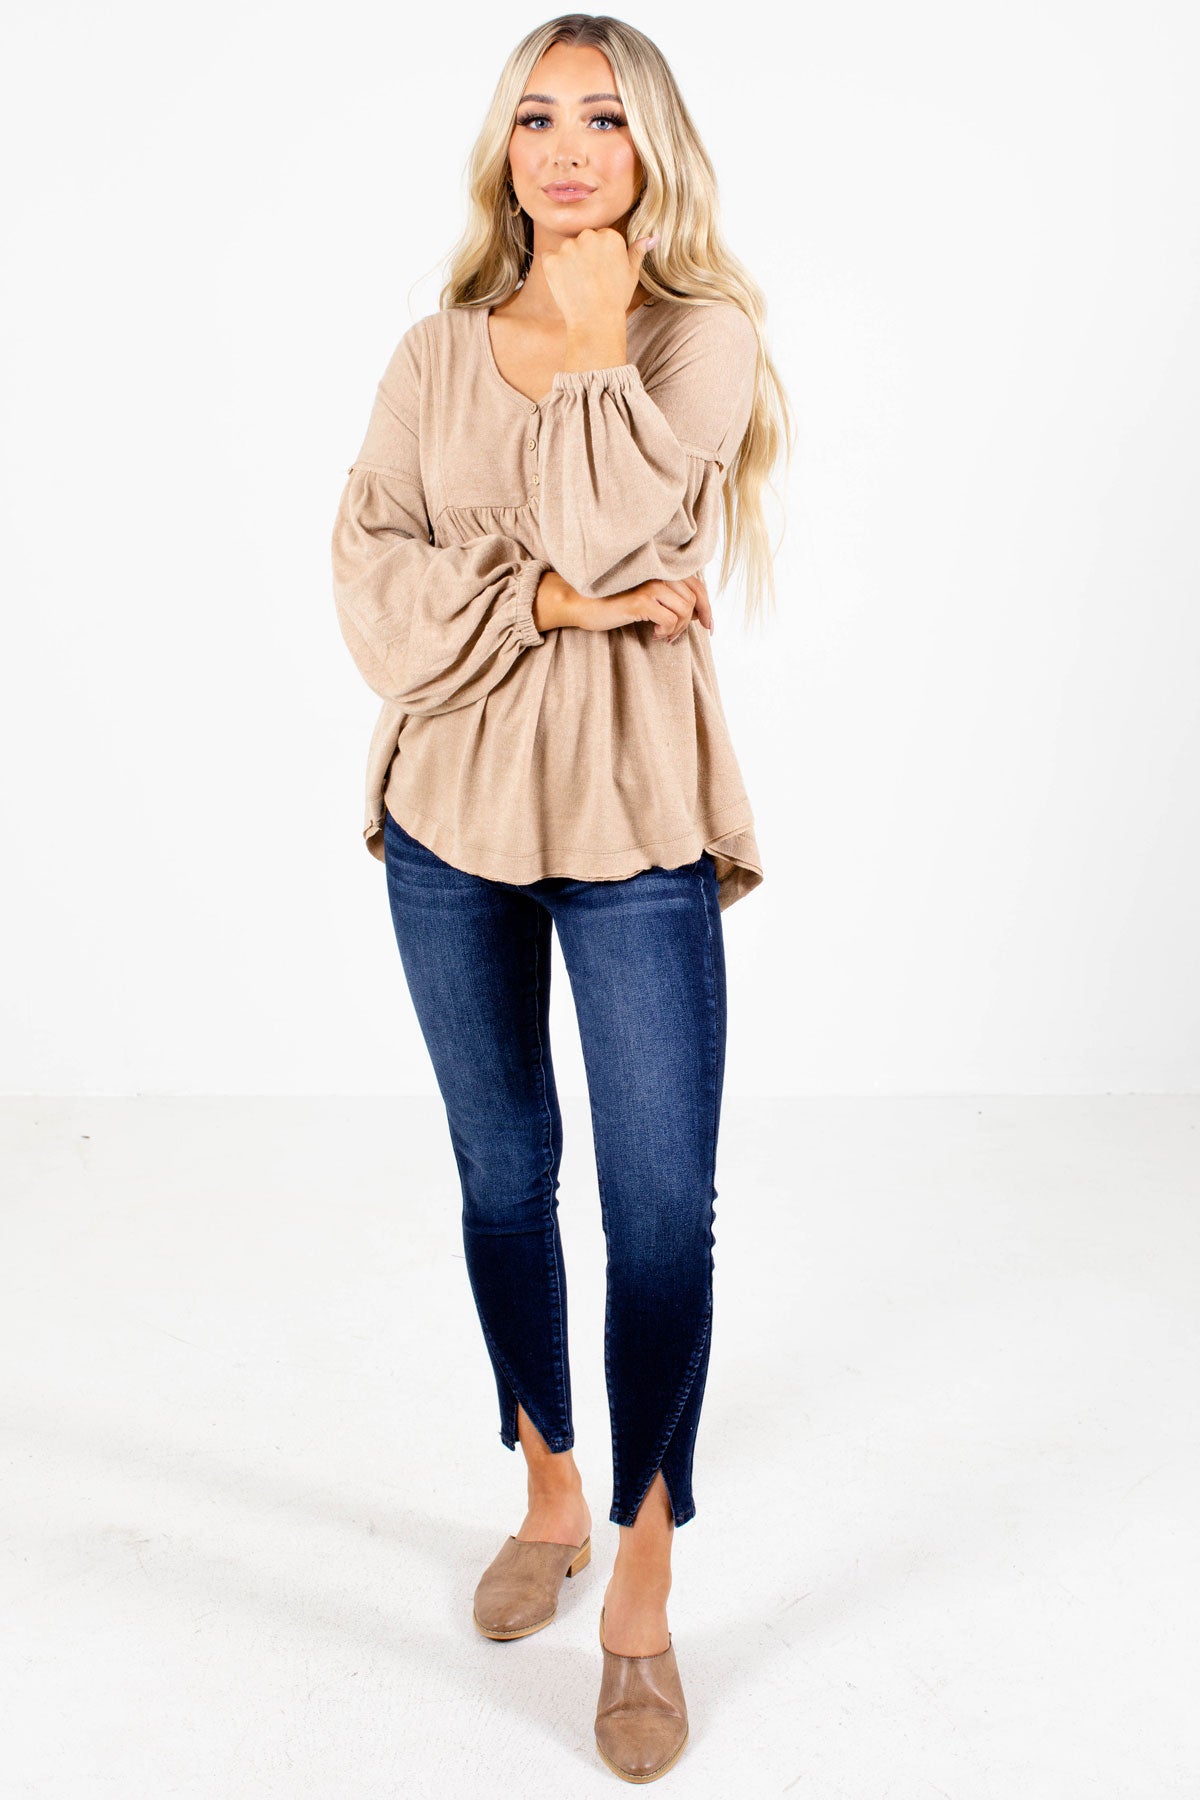 Taupe Boutique Top.